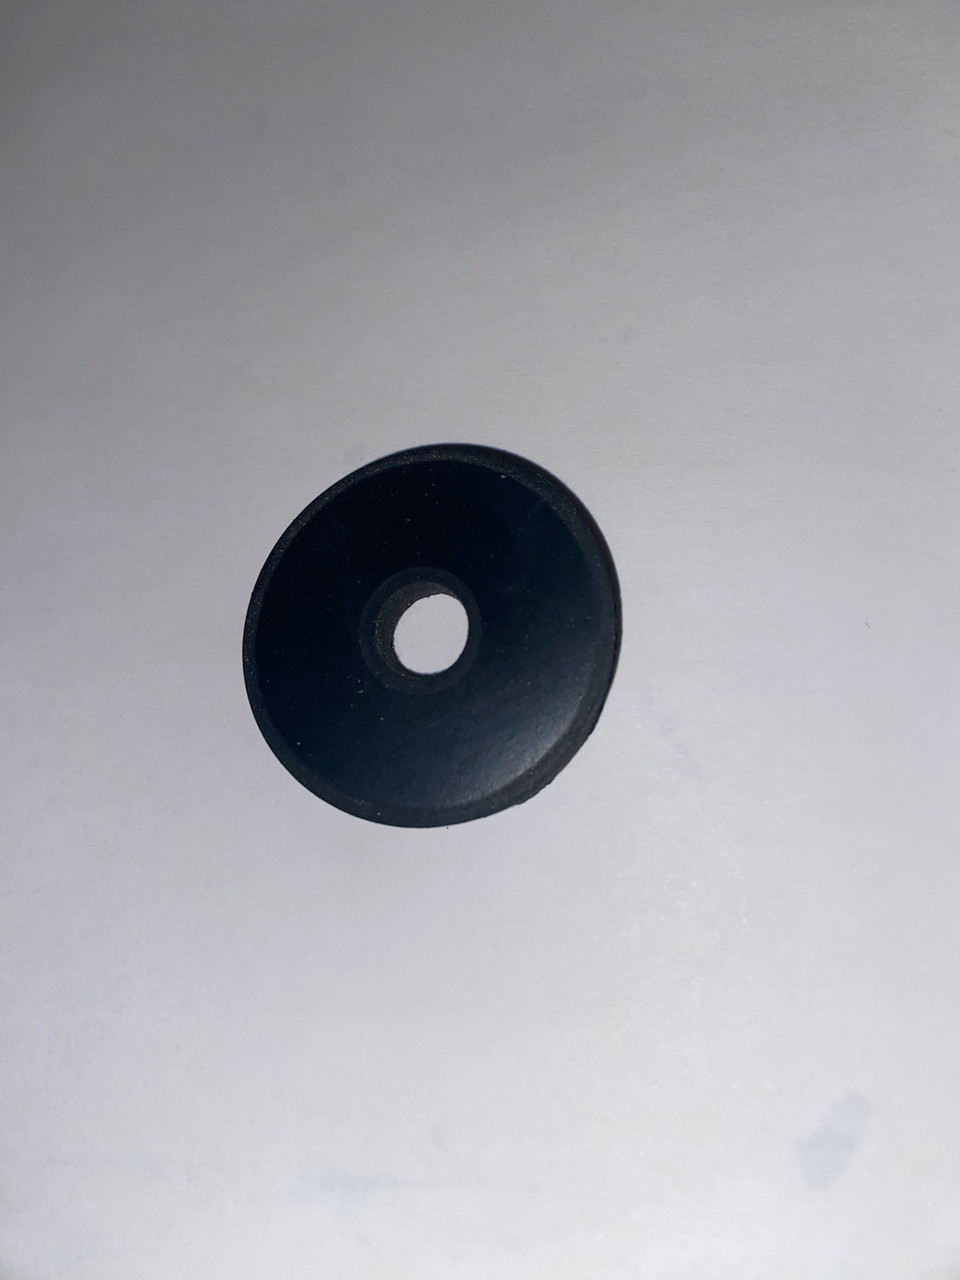 EARLS 5 MM RUBBER GAS TANK SUPPORT WASHER - 16114080148